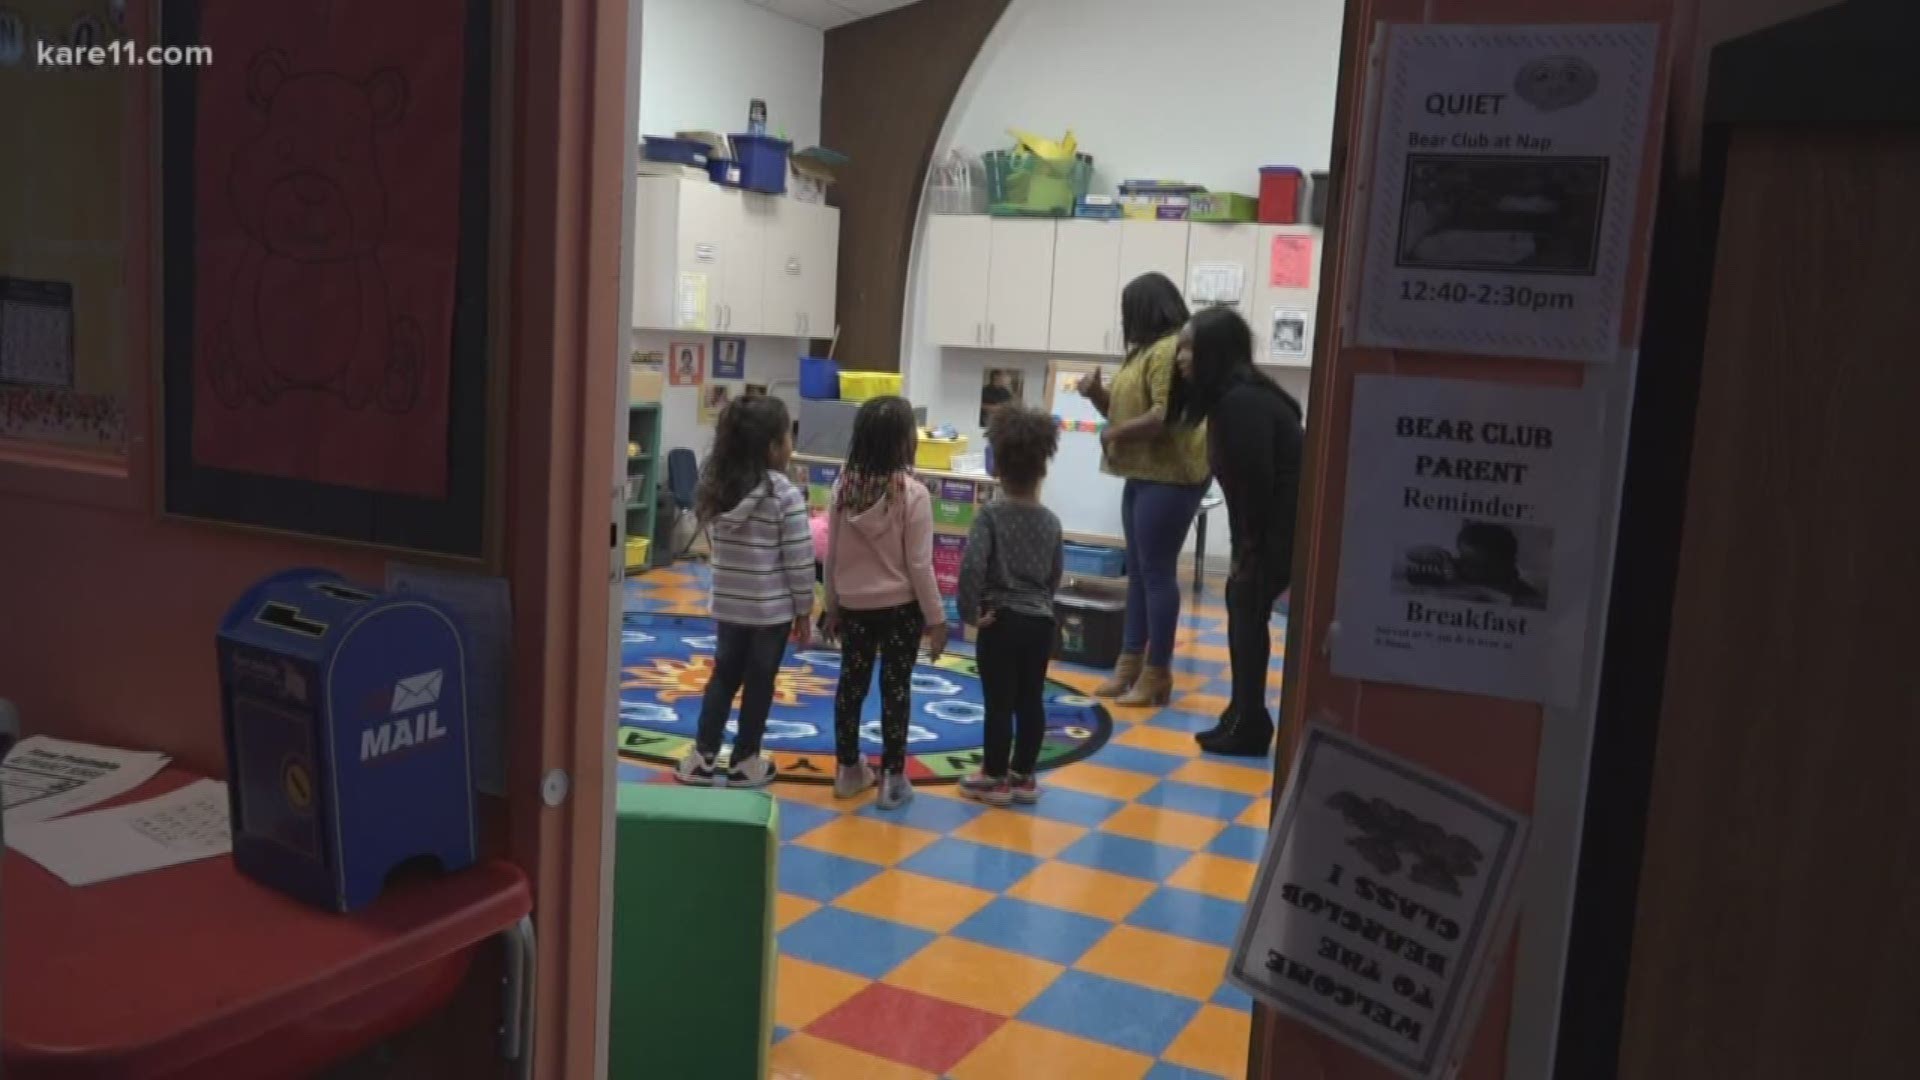 The Program Director at the Children's First Early Learning Center talks about mission to get kids living below poverty line ready for kindergarten.